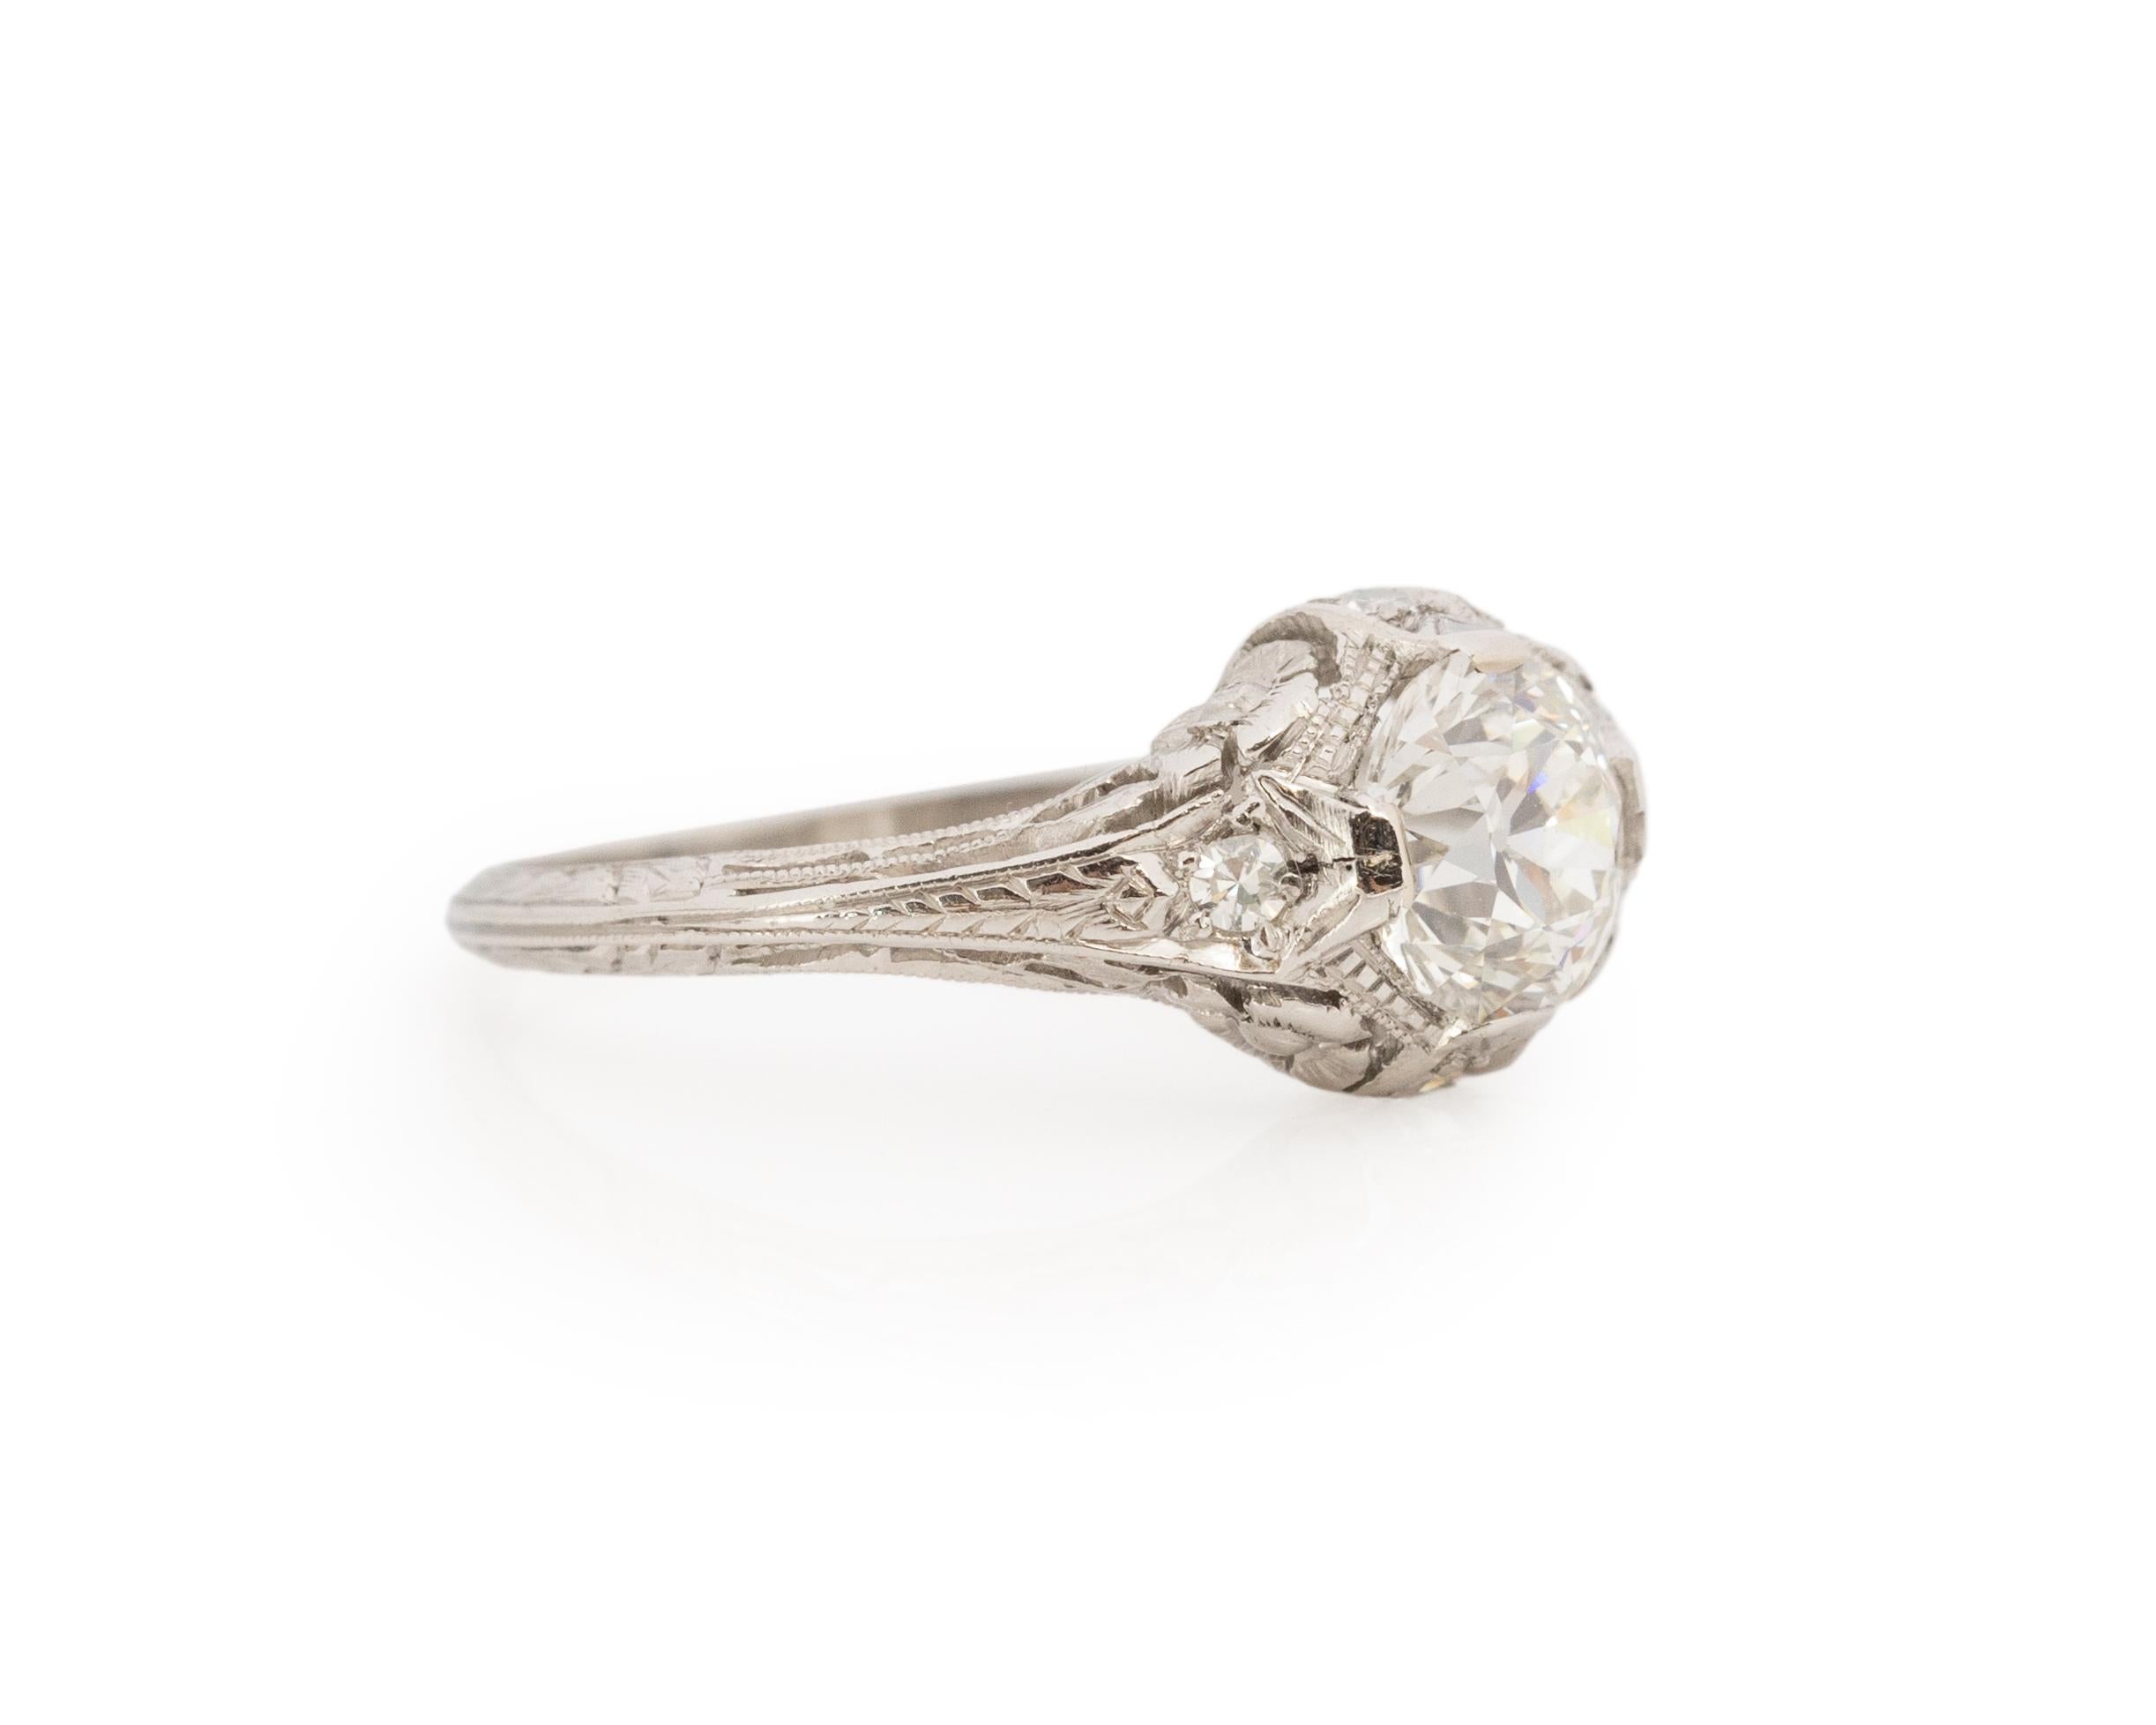 Ring Size: 5.25
Metal Type: Platinum [Hallmarked, and Tested]
Weight: 2.7 grams

Center Diamond Details:
GIA LAB REPORT #: 5222935888
Weight: .89ct
Cut: Old European brilliant
Color: I
Clarity: SI1
Measurements: 6.17mm x 6.03mm x 3.86mm

Side